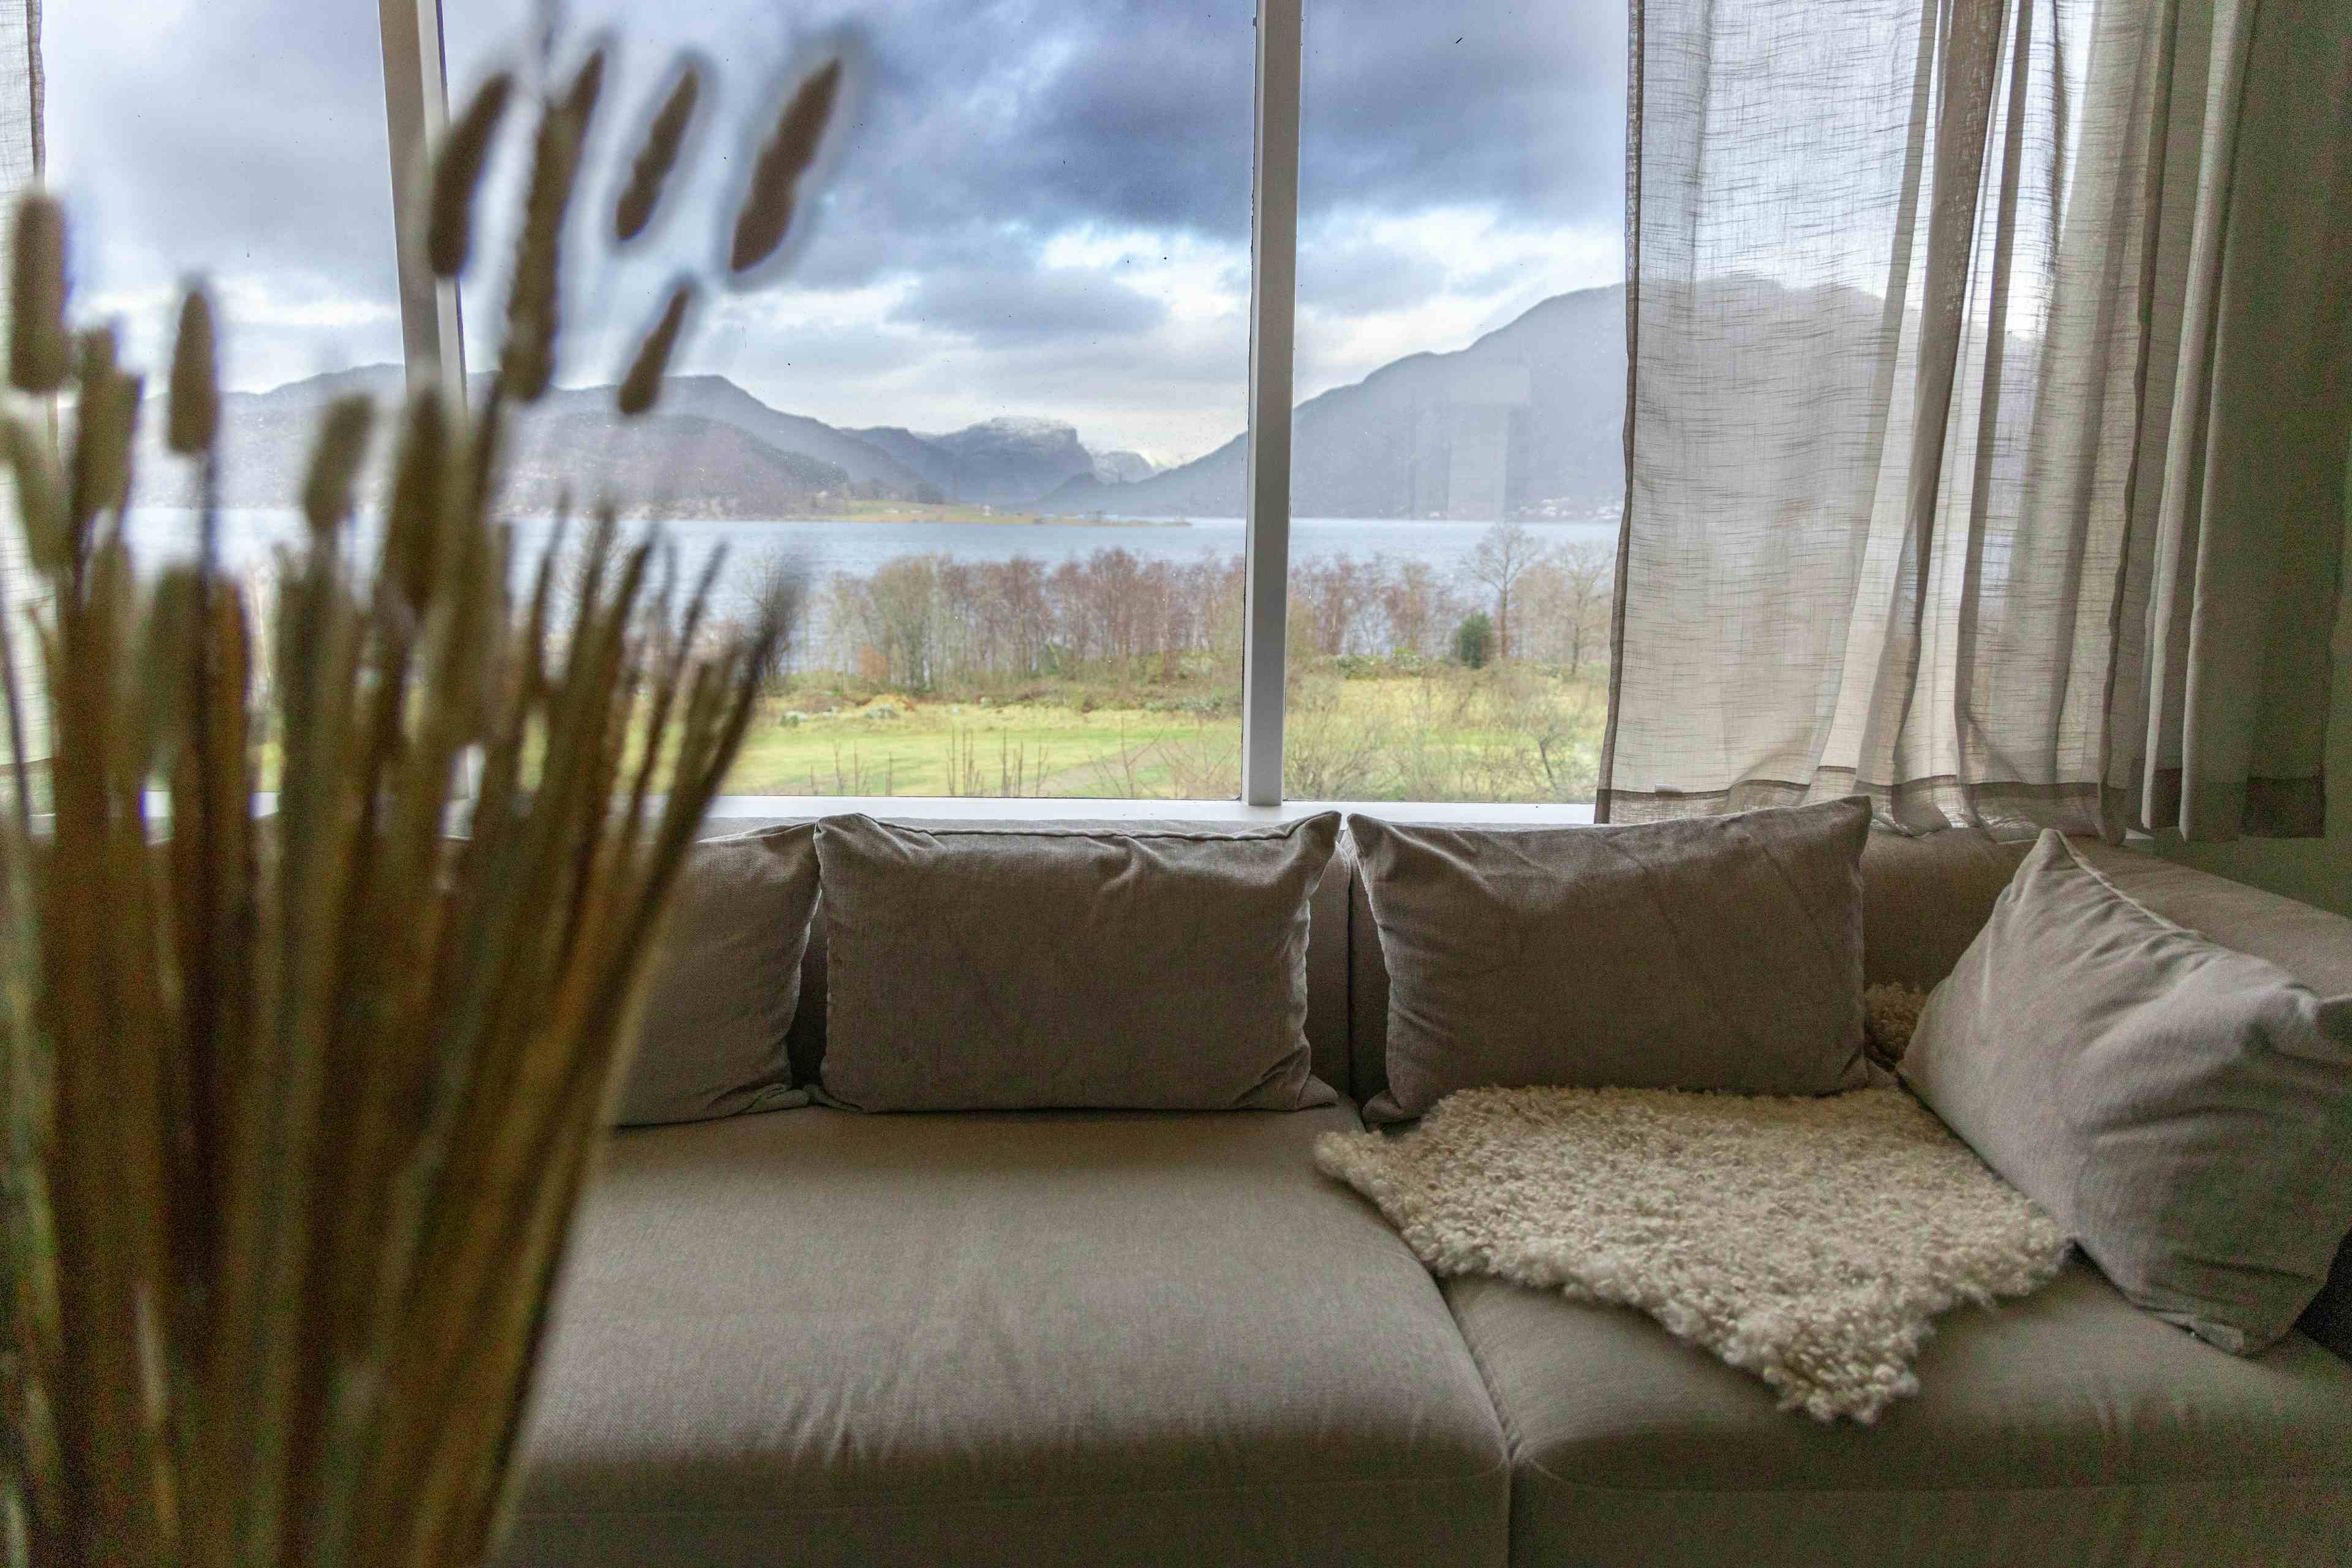 A living room in a hoilday home. Decorated in cream and white in a nordic style. Views of the fjord out the window. The photo shows a sofa, a chair, a coffee table and a book case. Holiday house near Lauvvik